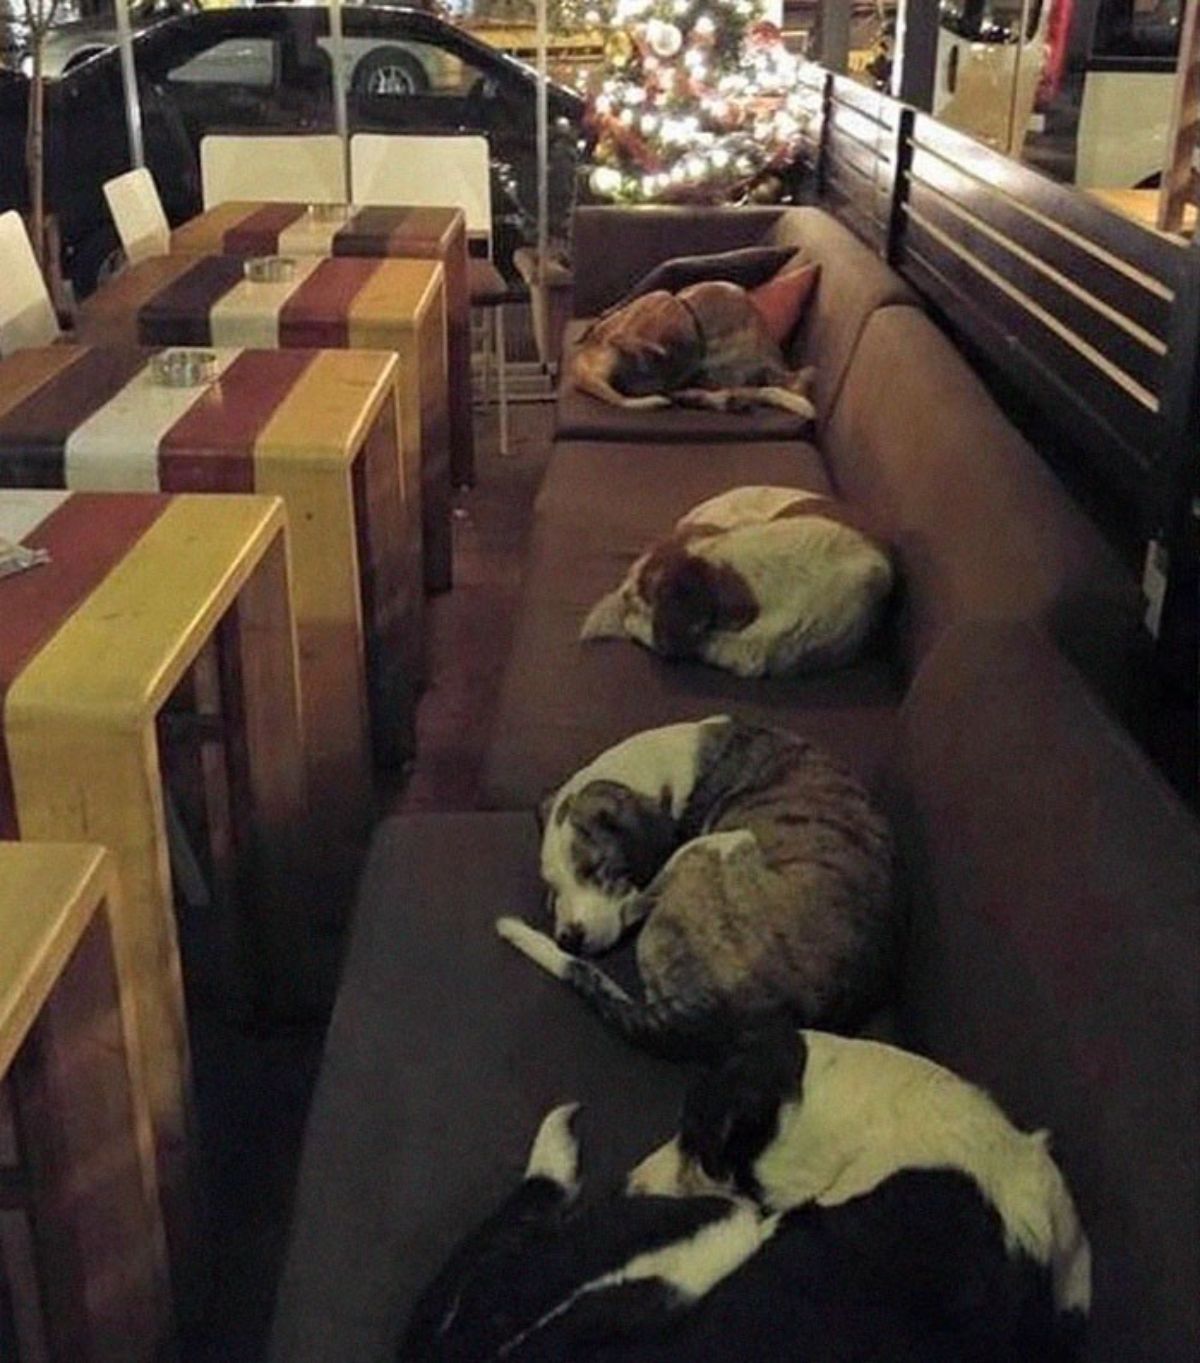 4 dogs sleeping on brown couches of a coffee shop at night